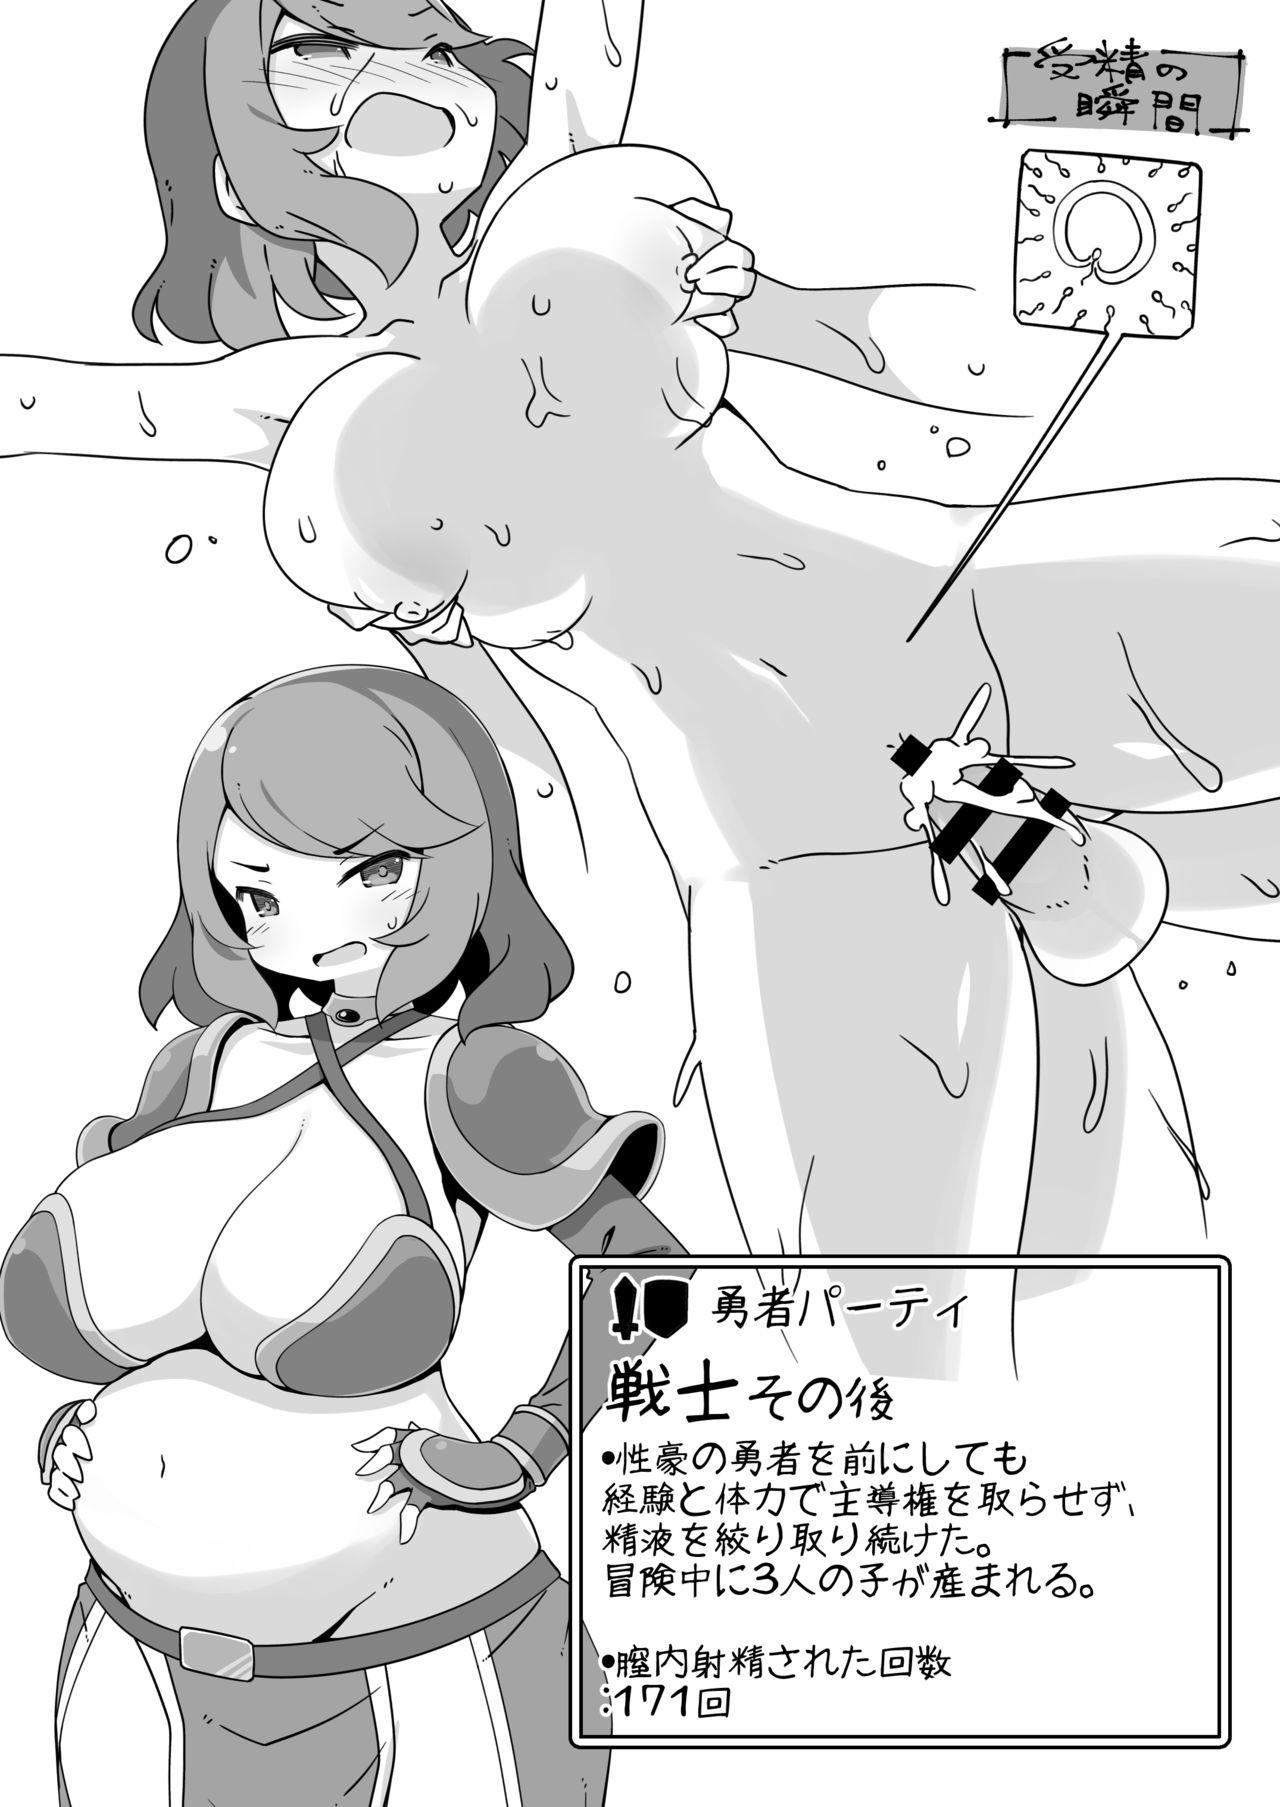 [Succubus Egg] A fantasy world that is too forgiving to heroes-NPC (mob) opponent-centered short H manga collection-(Added extra belly H.) 44